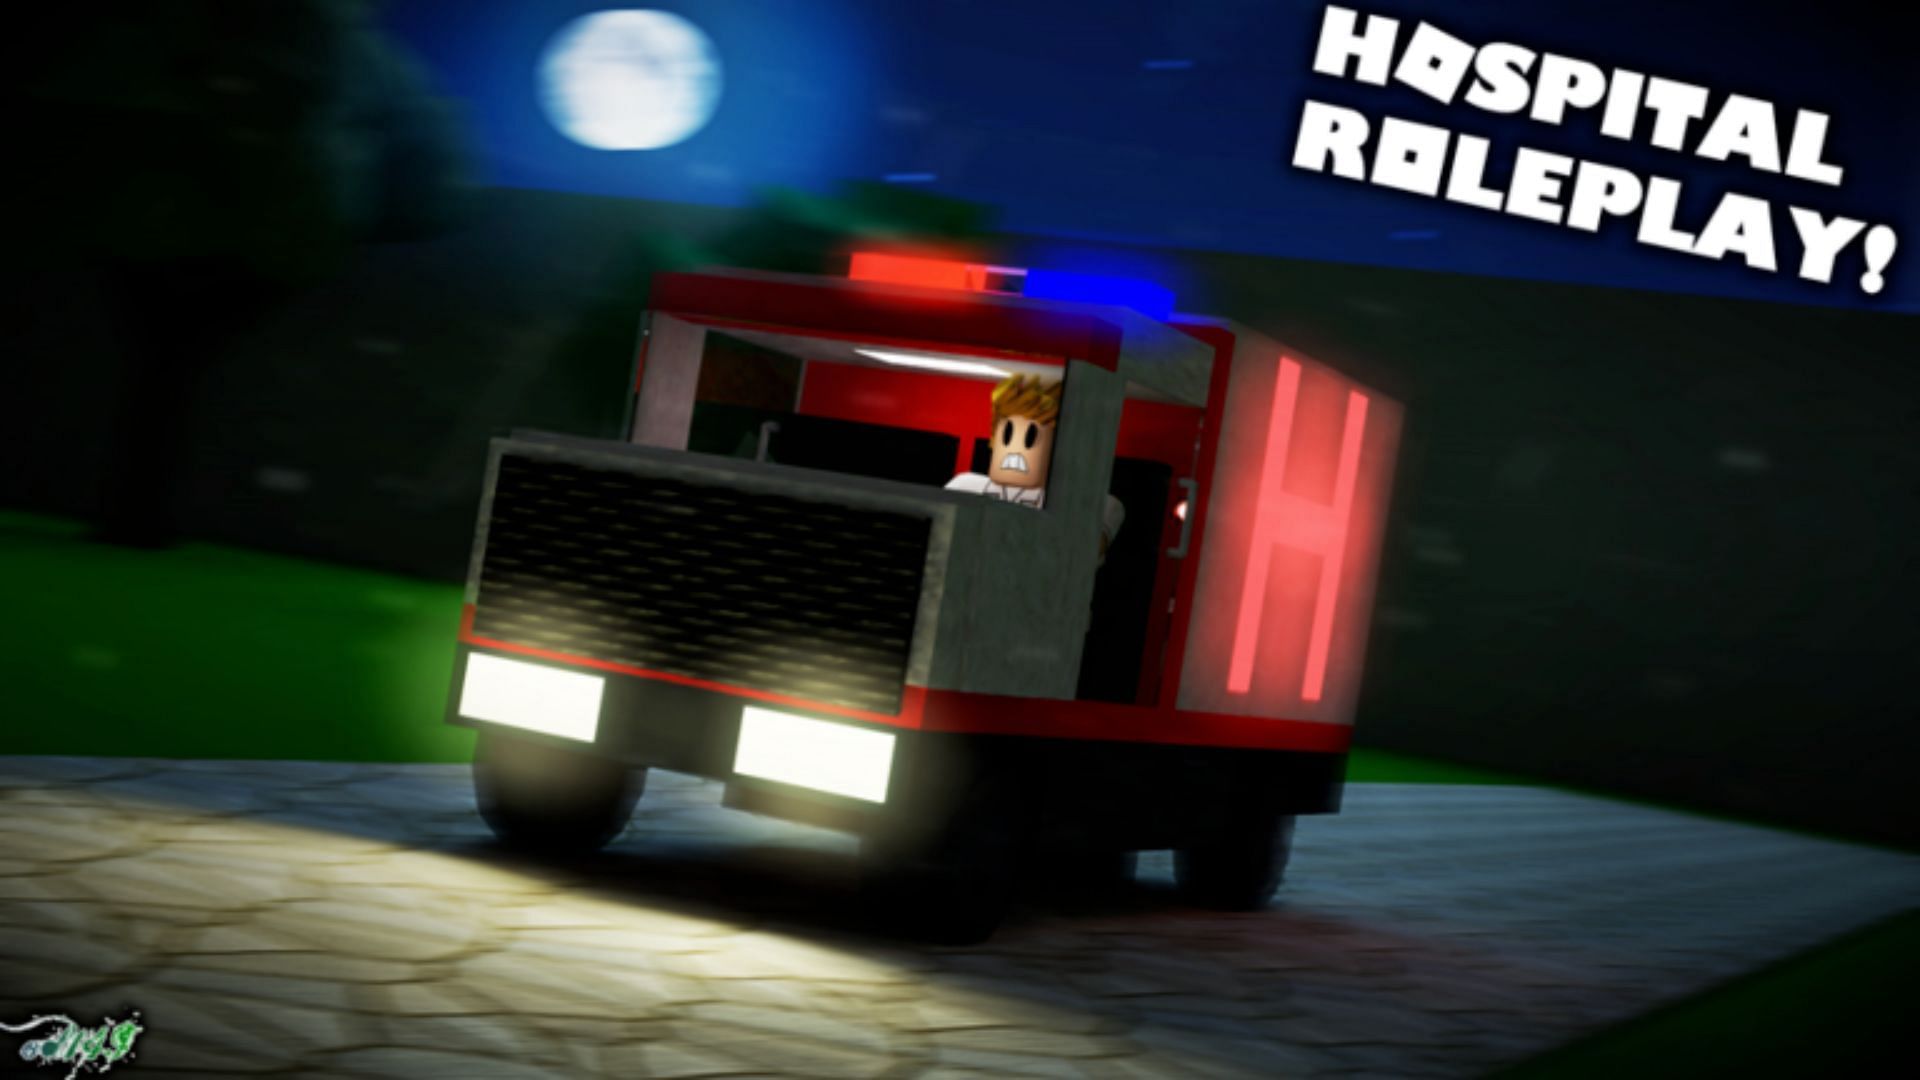 Hospital Roleplay is available on Roblox (Image via Roblox)